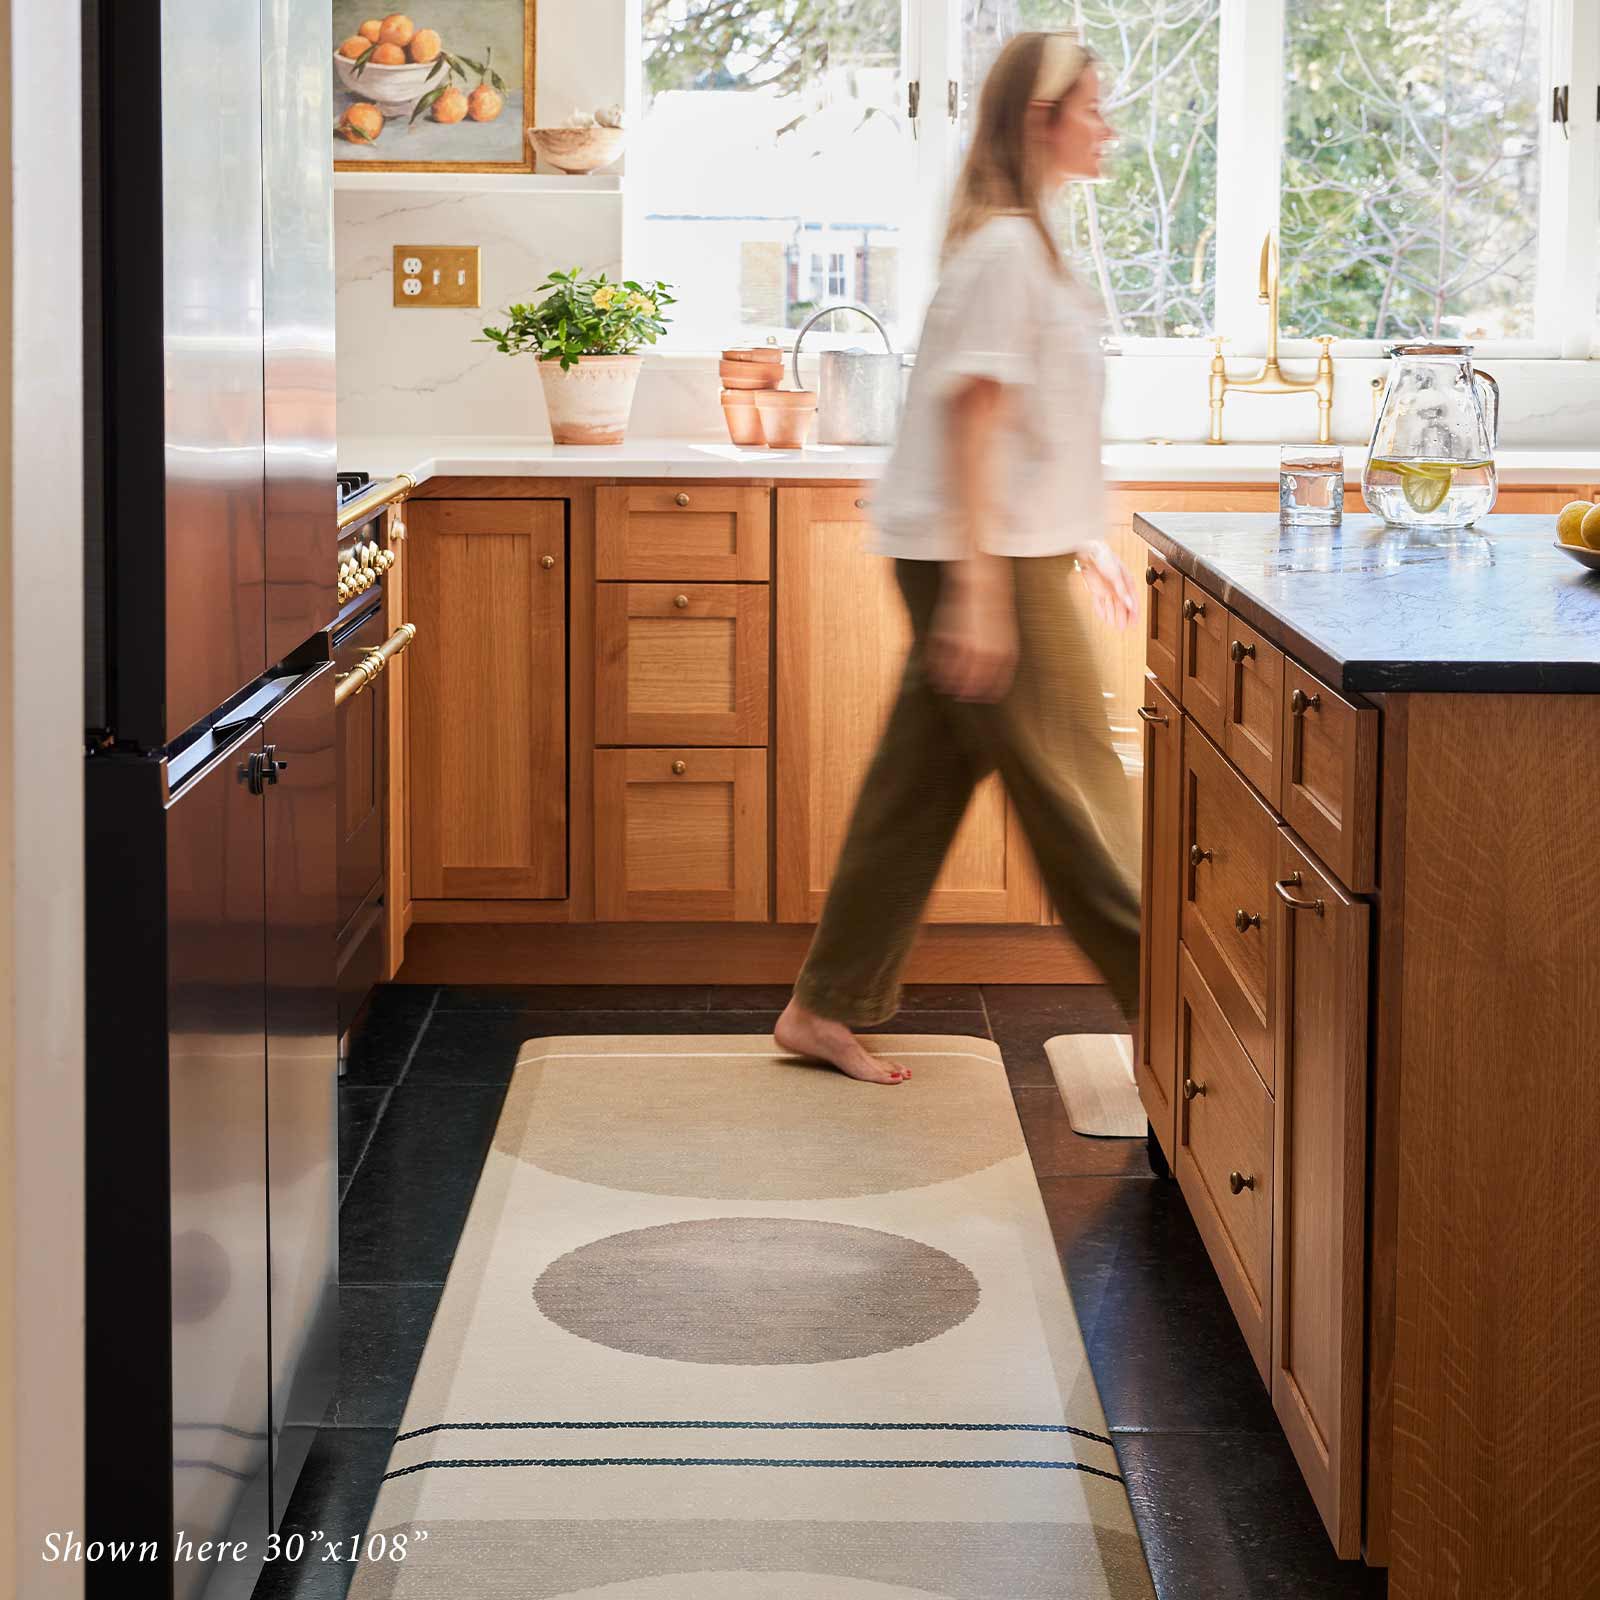 Geode Sesame beige, tan, and brown geometric line print standing mat shown in size 30x108 in front of kitchen island with woman walking past